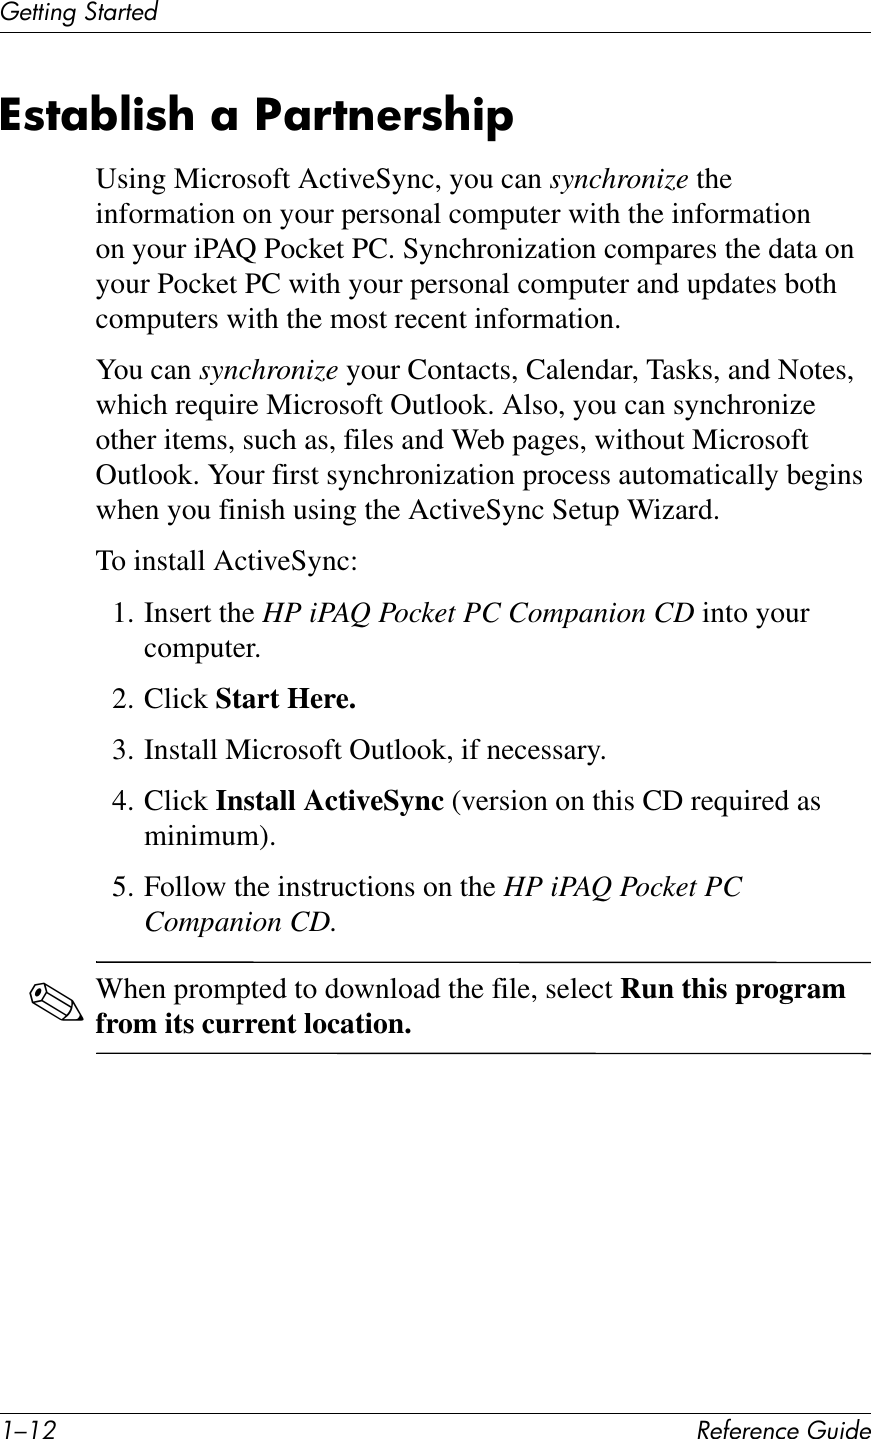 ./.0 !&quot;#&quot;$&quot;%&amp;&quot;&apos;()*+&quot;(&quot;11*%2&apos;314$1&quot;+^87;W@)8?&amp;;&amp;S;!7$&quot;!8?)FUsing Microsoft ActiveSync, you can synchronize the information on your personal computer with the information on your iPAQ Pocket PC. Synchronization compares the data on your Pocket PC with your personal computer and updates both computers with the most recent information.You can synchronize your Contacts, Calendar, Tasks, and Notes, which require Microsoft Outlook. Also, you can synchronize other items, such as, files and Web pages, without Microsoft Outlook. Your first synchronization process automatically begins when you finish using the ActiveSync Setup Wizard.To install ActiveSync:1. Insert the HP iPAQ Pocket PC Companion CD into your computer.2. Click Start Here.3. Install Microsoft Outlook, if necessary.4. Click Install ActiveSync (version on this CD required as minimum). 5. Follow the instructions on the HP iPAQ Pocket PC Companion CD.✎When prompted to download the file, select Run this program from its current location.